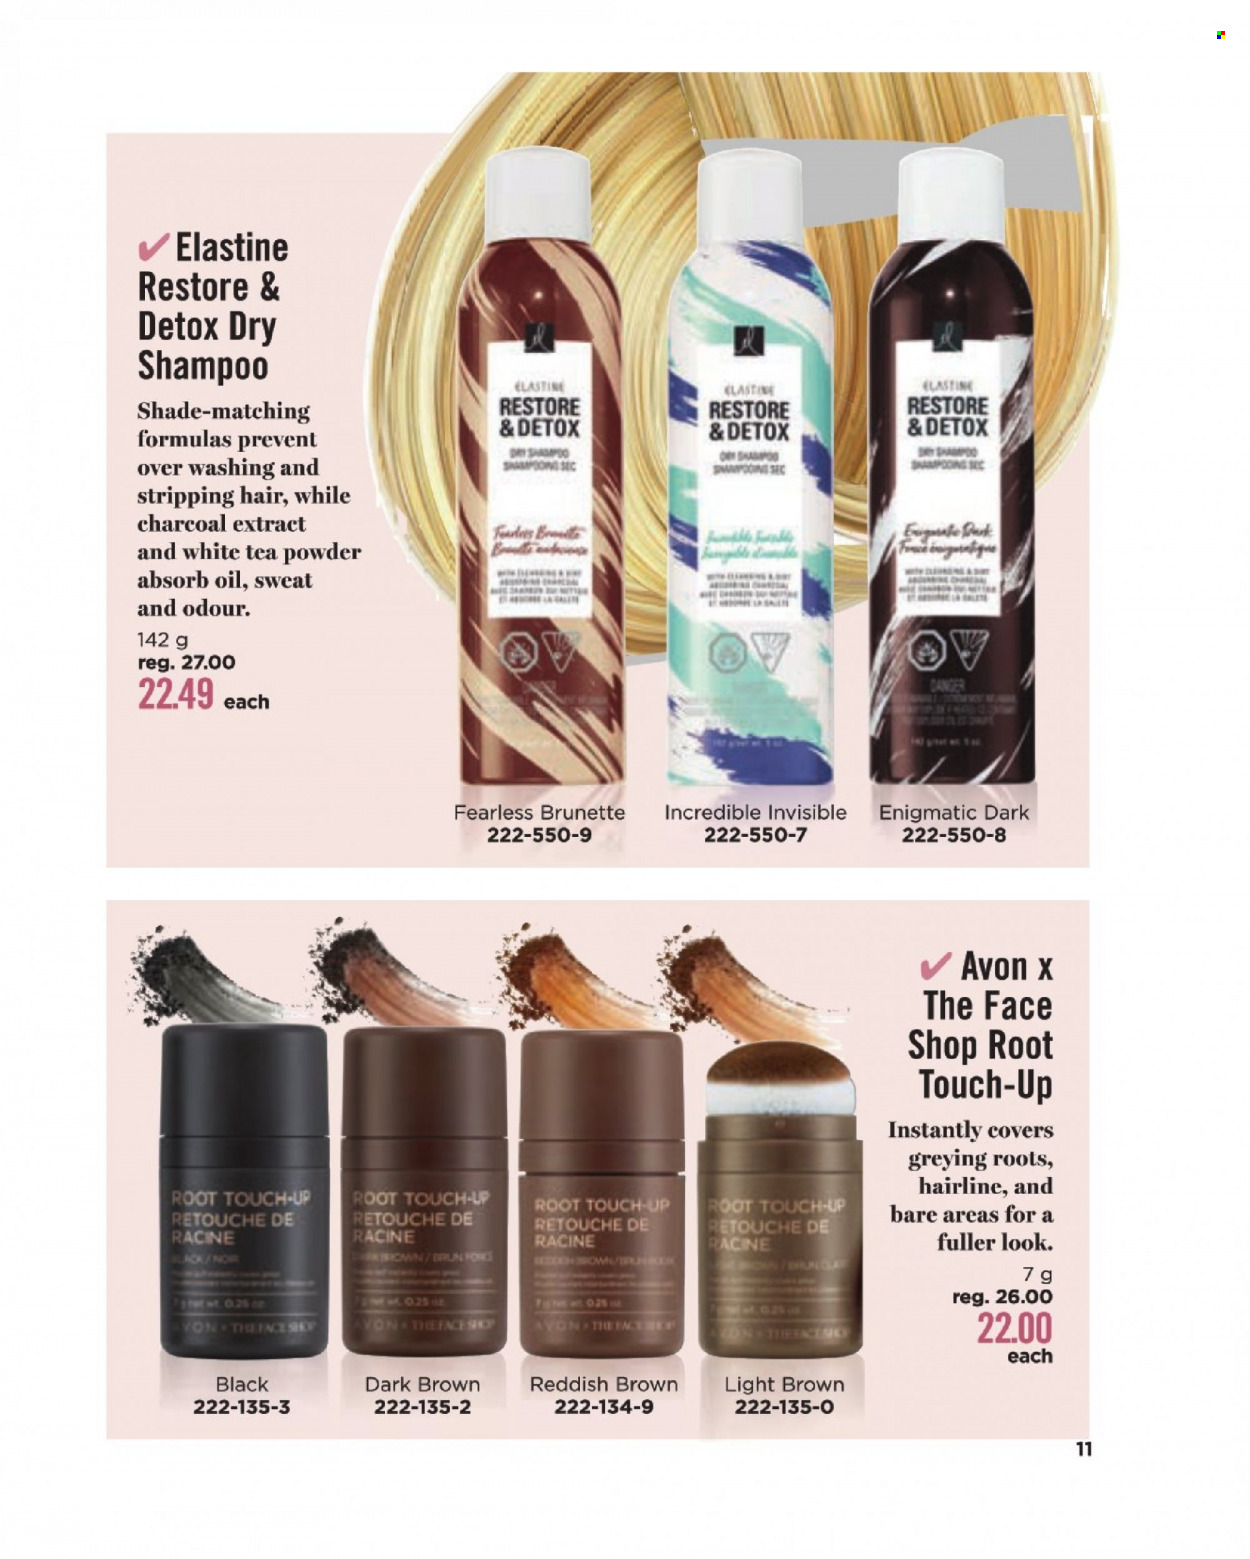 thumbnail - Avon Flyer - Sales products - Avon, Root Touch-Up, shampoo. Page 11.